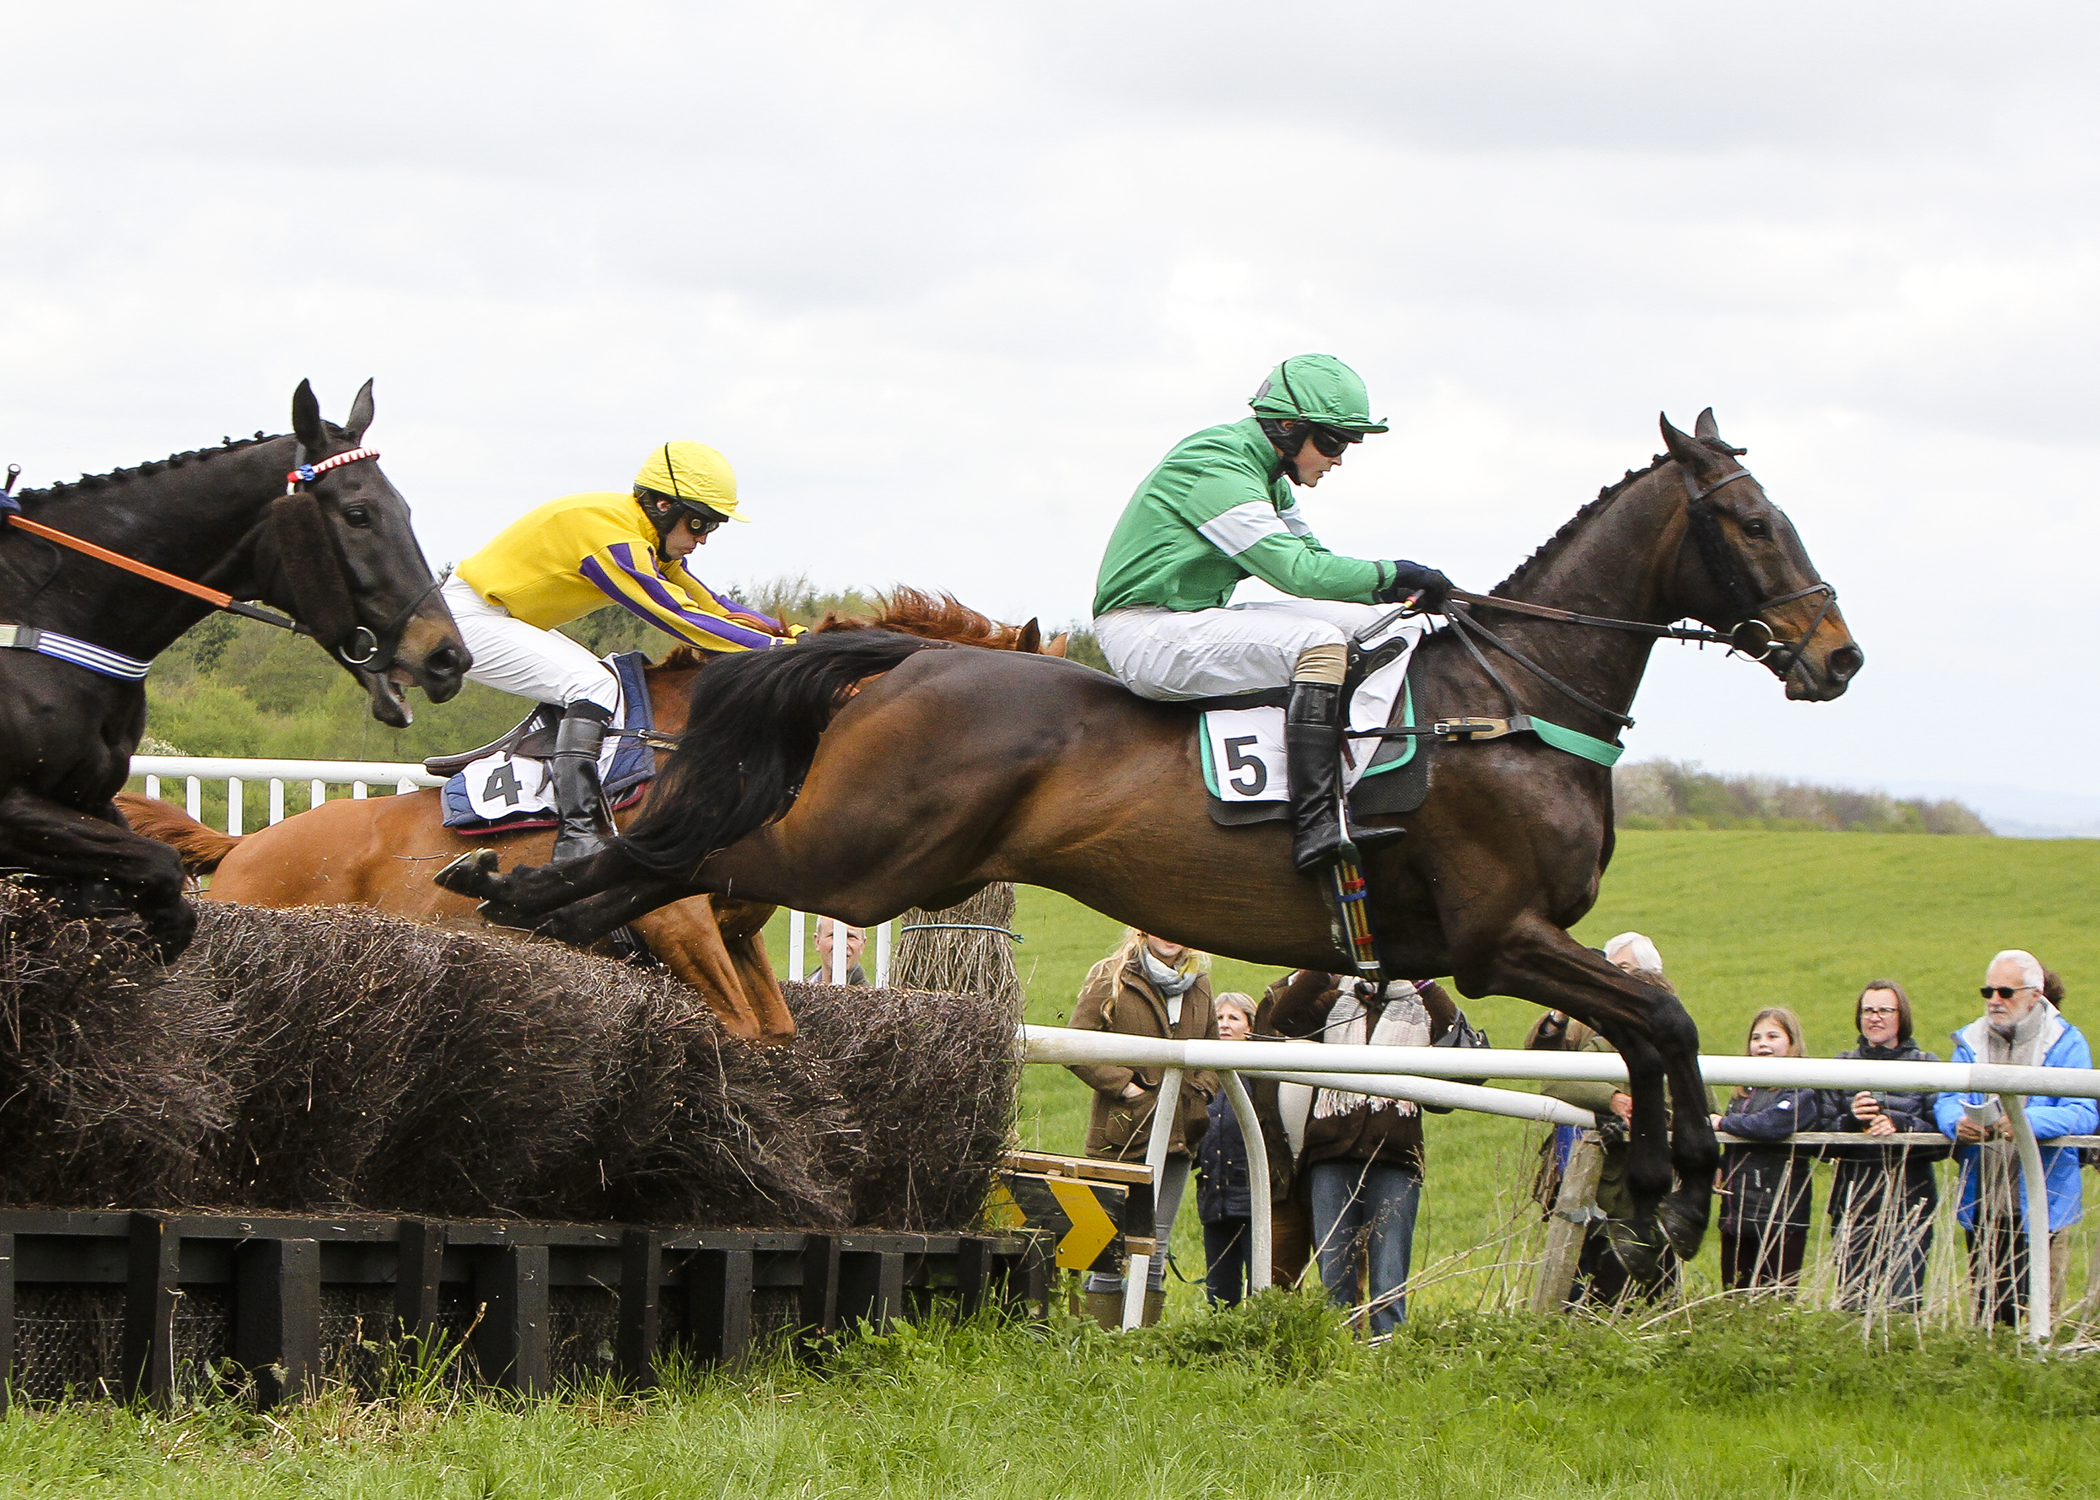 Grafton Point-to-Point at Edgcote Preview